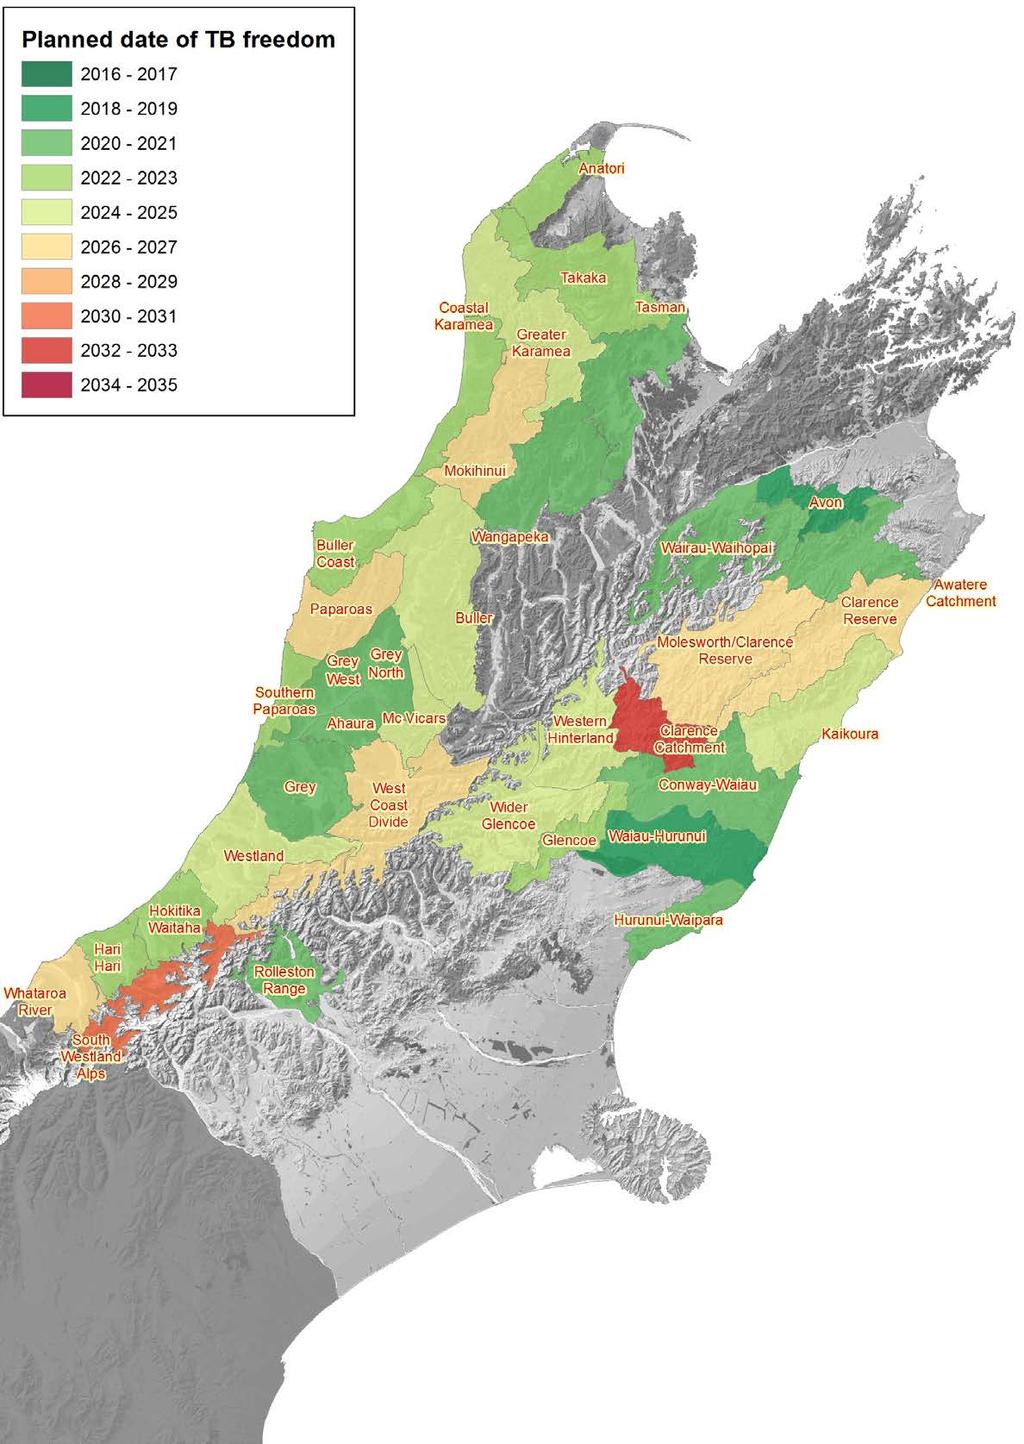 MAP 4: Northern South Island TB Management Areas and